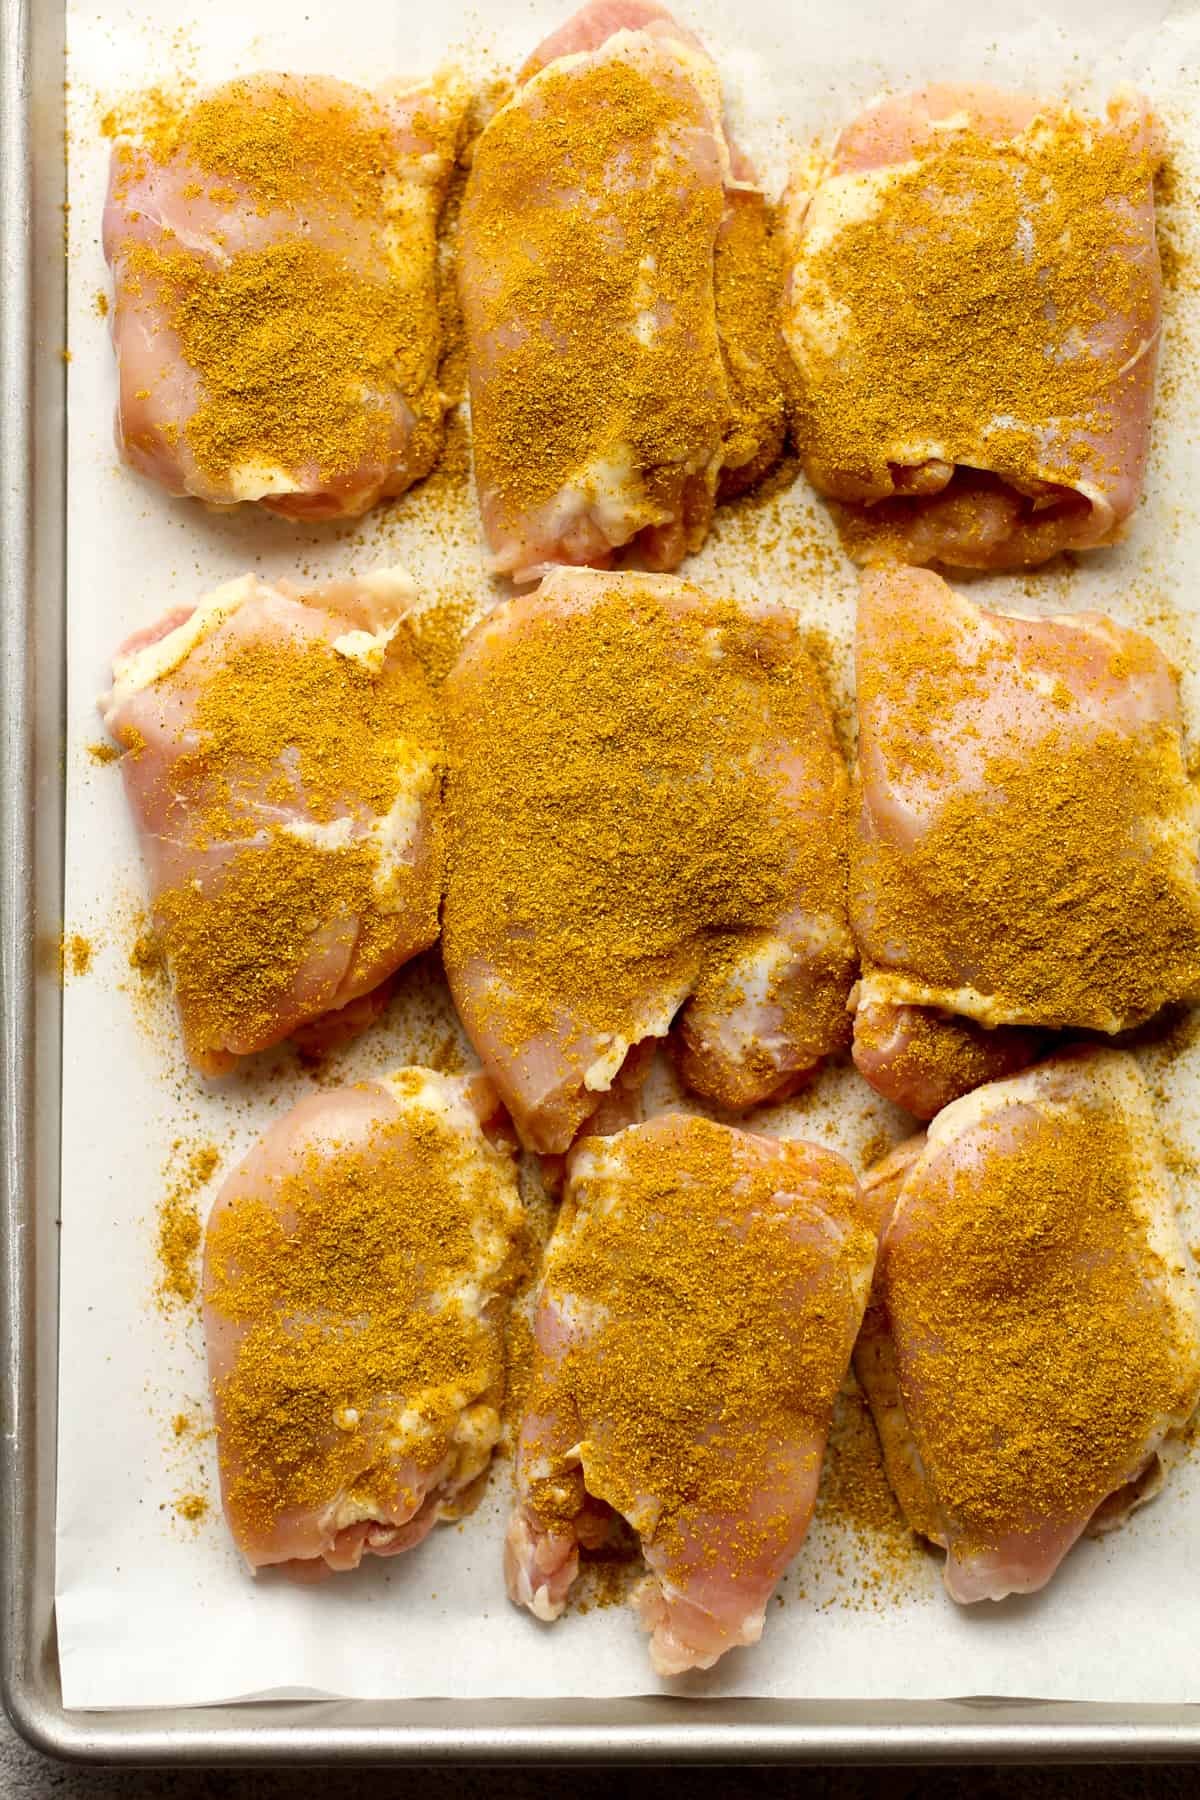 Nine chicken thighs on a baking sheet, with curry powder.